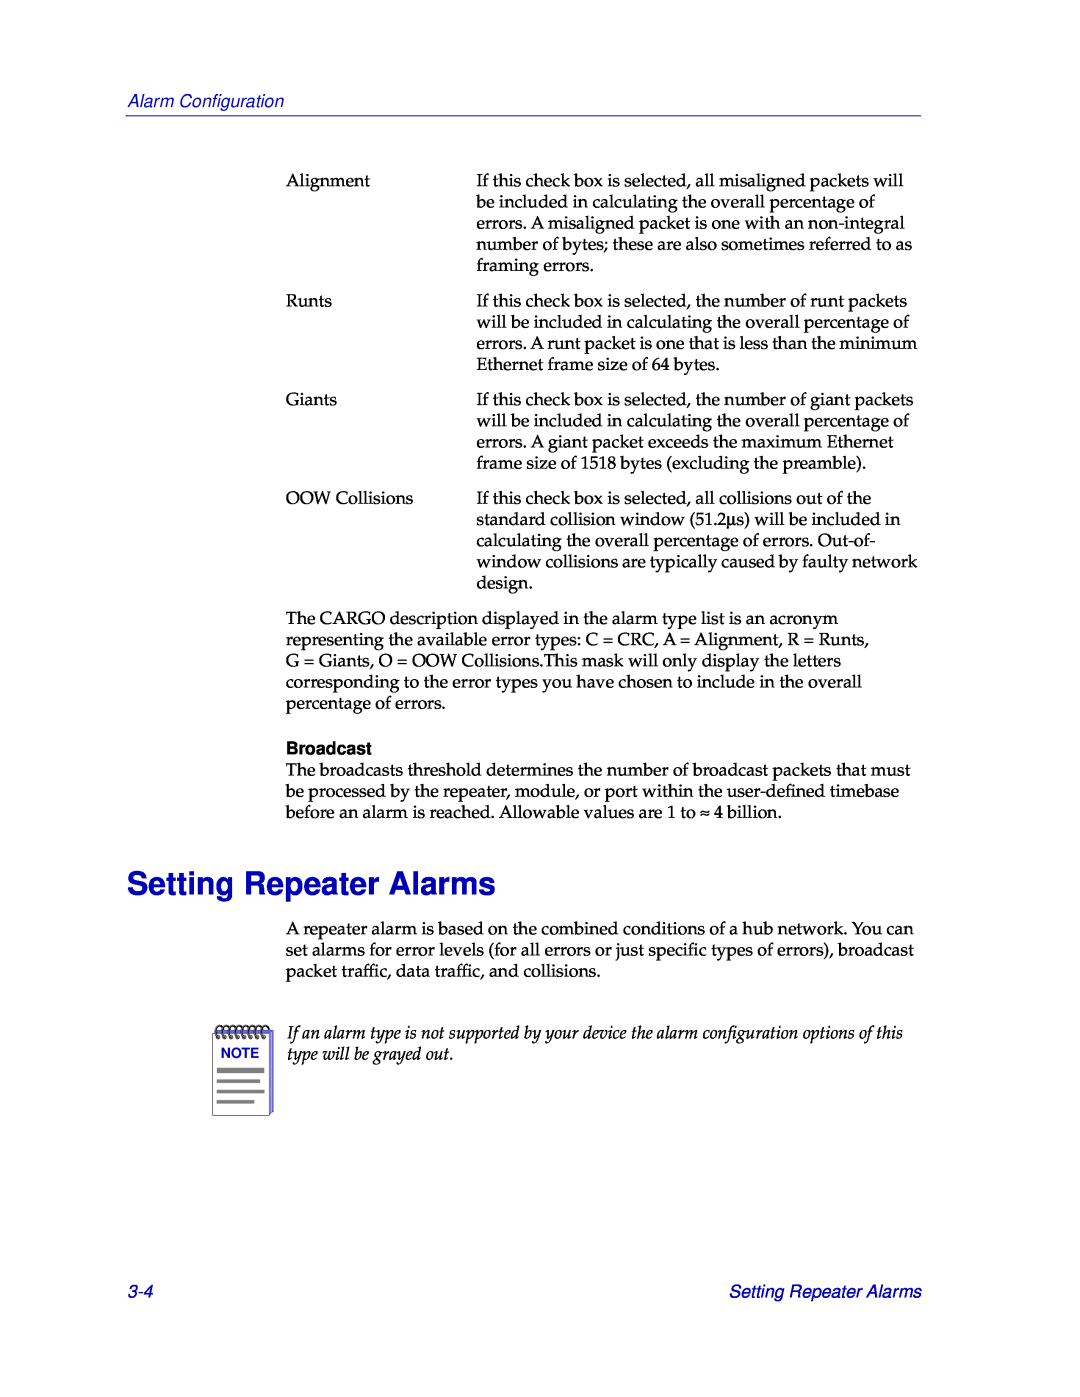 Cabletron Systems EMM-E6 manual Setting Repeater Alarms, Broadcast, Alarm Conﬁguration 